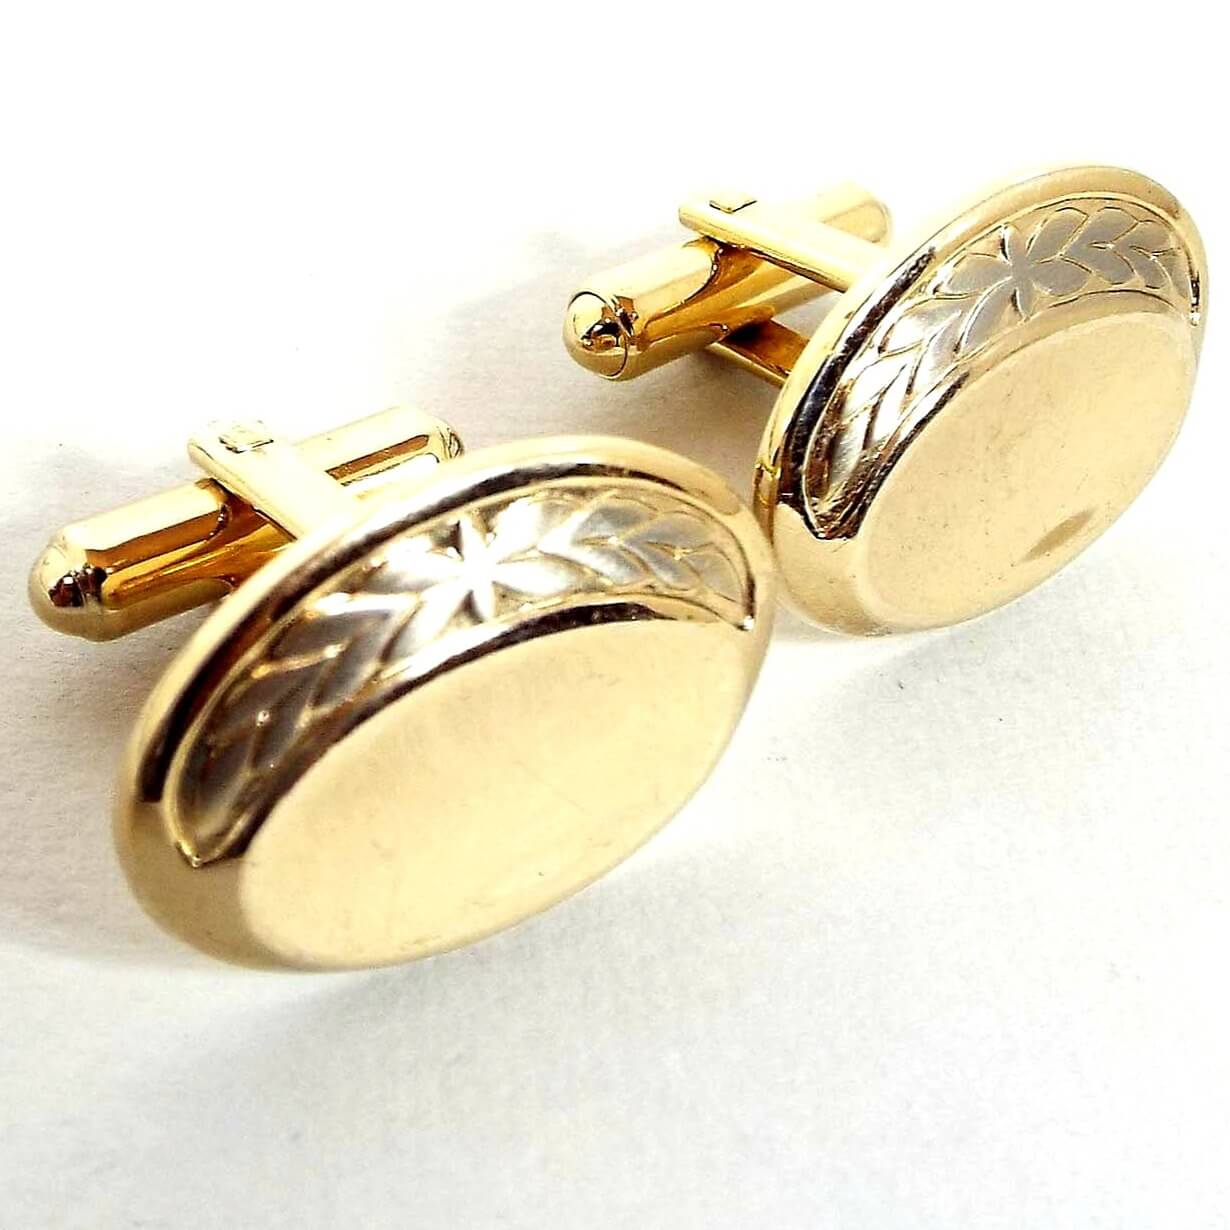 Angled front view of the retro vintage Hickok cufflinks. They are oval in shape and mostly gold tone in color. There is a silver tone leaf design around the top edge.